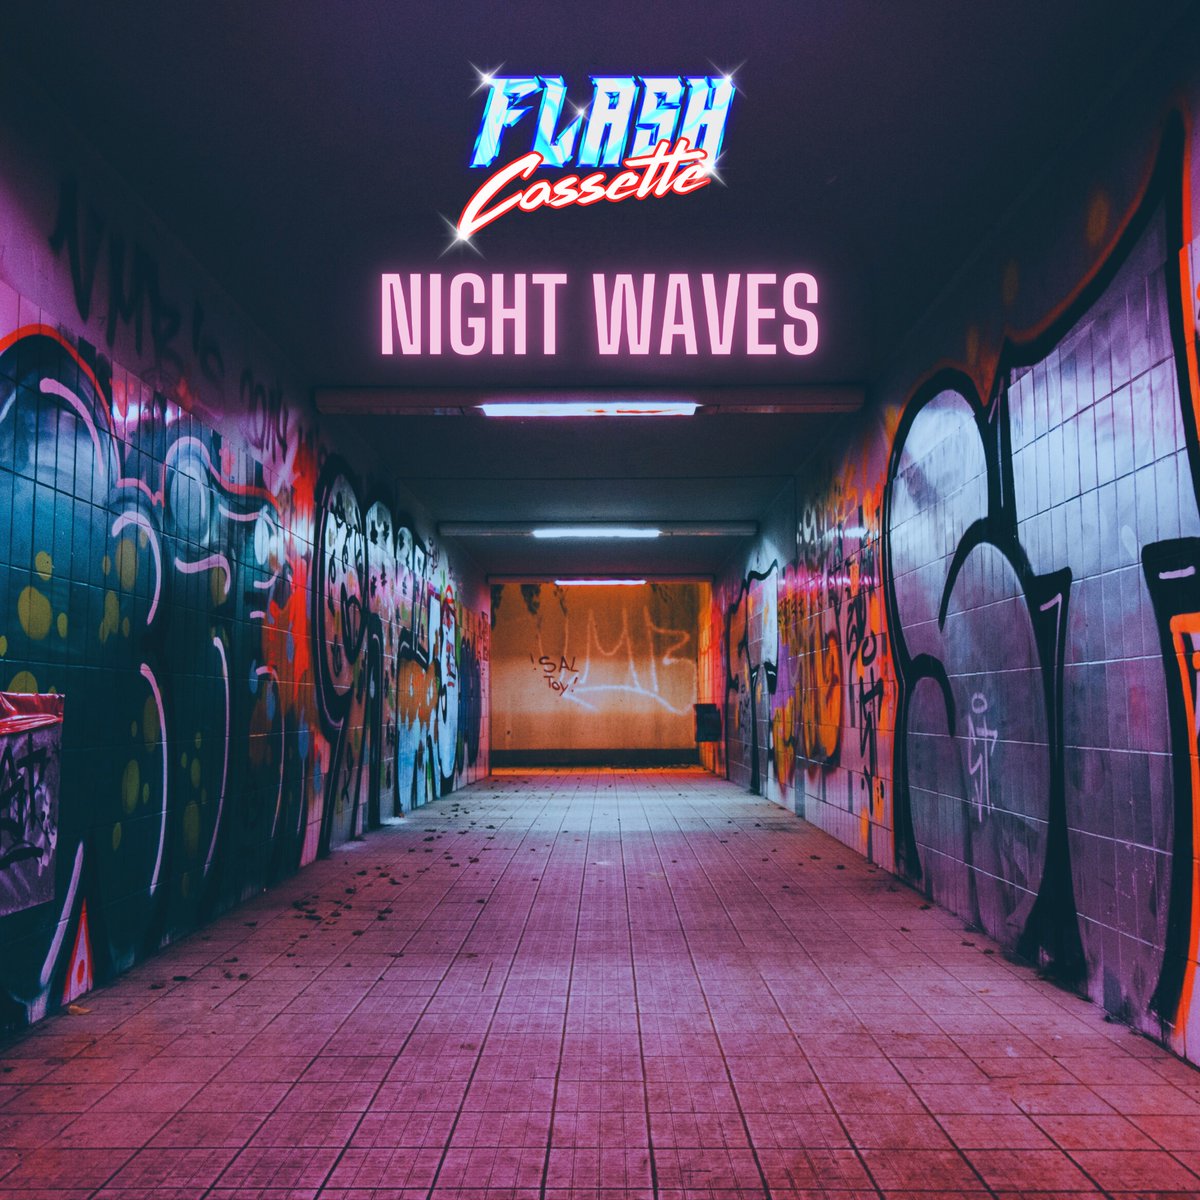 *New Single Alert* 

5th April 2024

‘Night Waves’ will be arriving to sweep you away on a journey of pure funk! 
⚡️📼

#newsingle #newmusic #electrofunk #synth #retrowave #disco #80s #nudisco #vocoder #groove #nightwaves #artwork